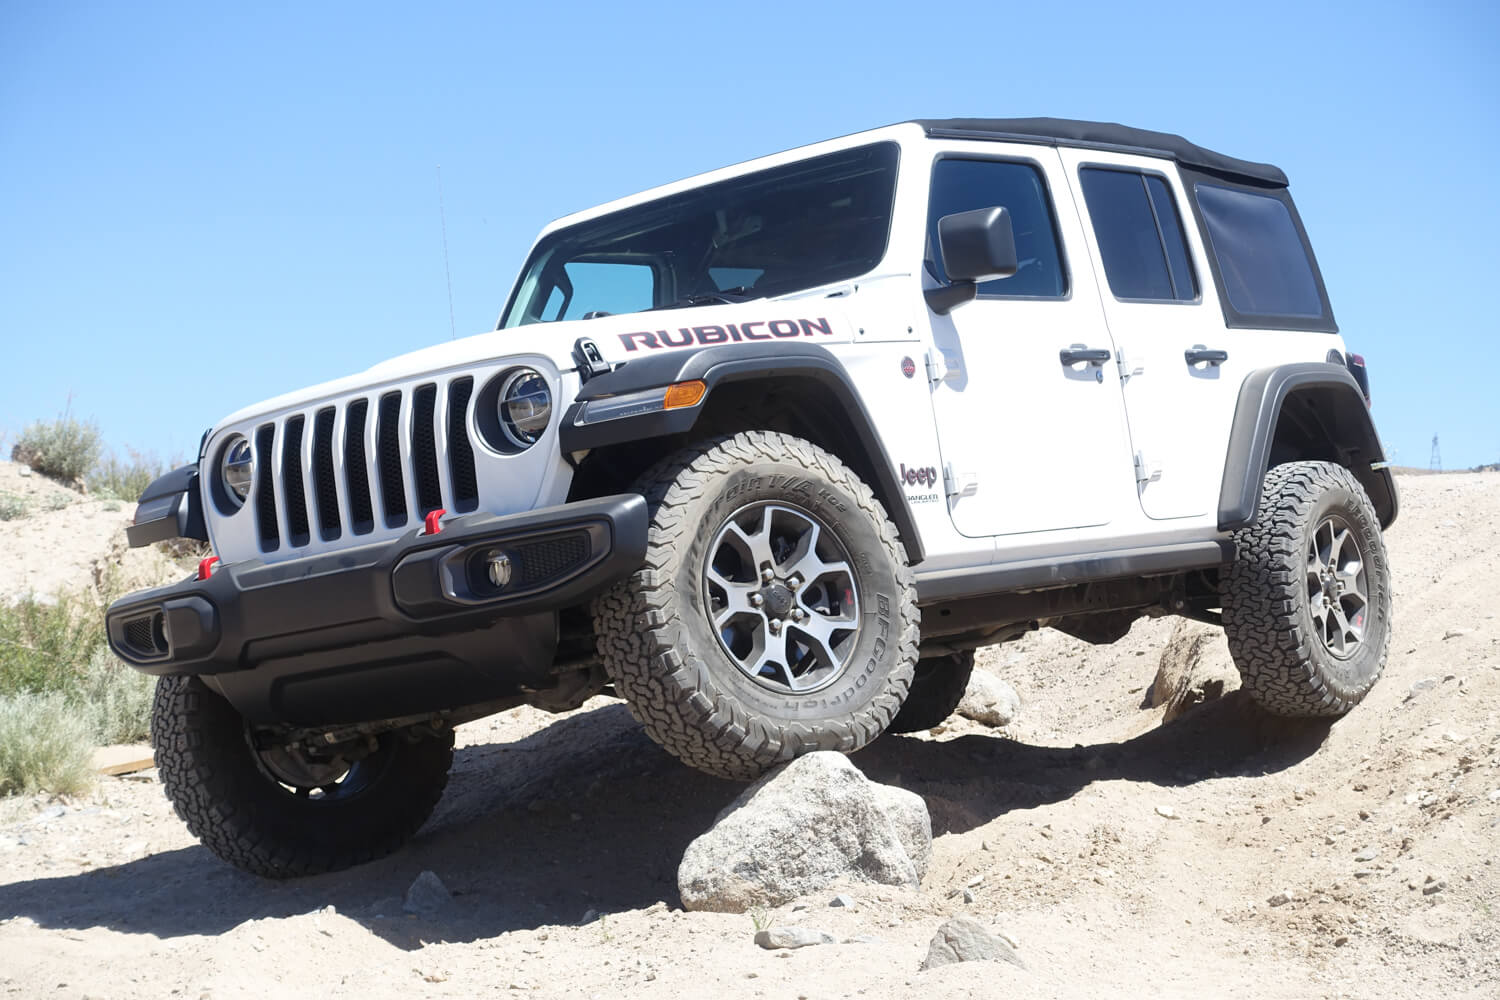 Jeep Wrangler JL Four Cylinder Turbo Versus V6 - The Dirt by 4WP